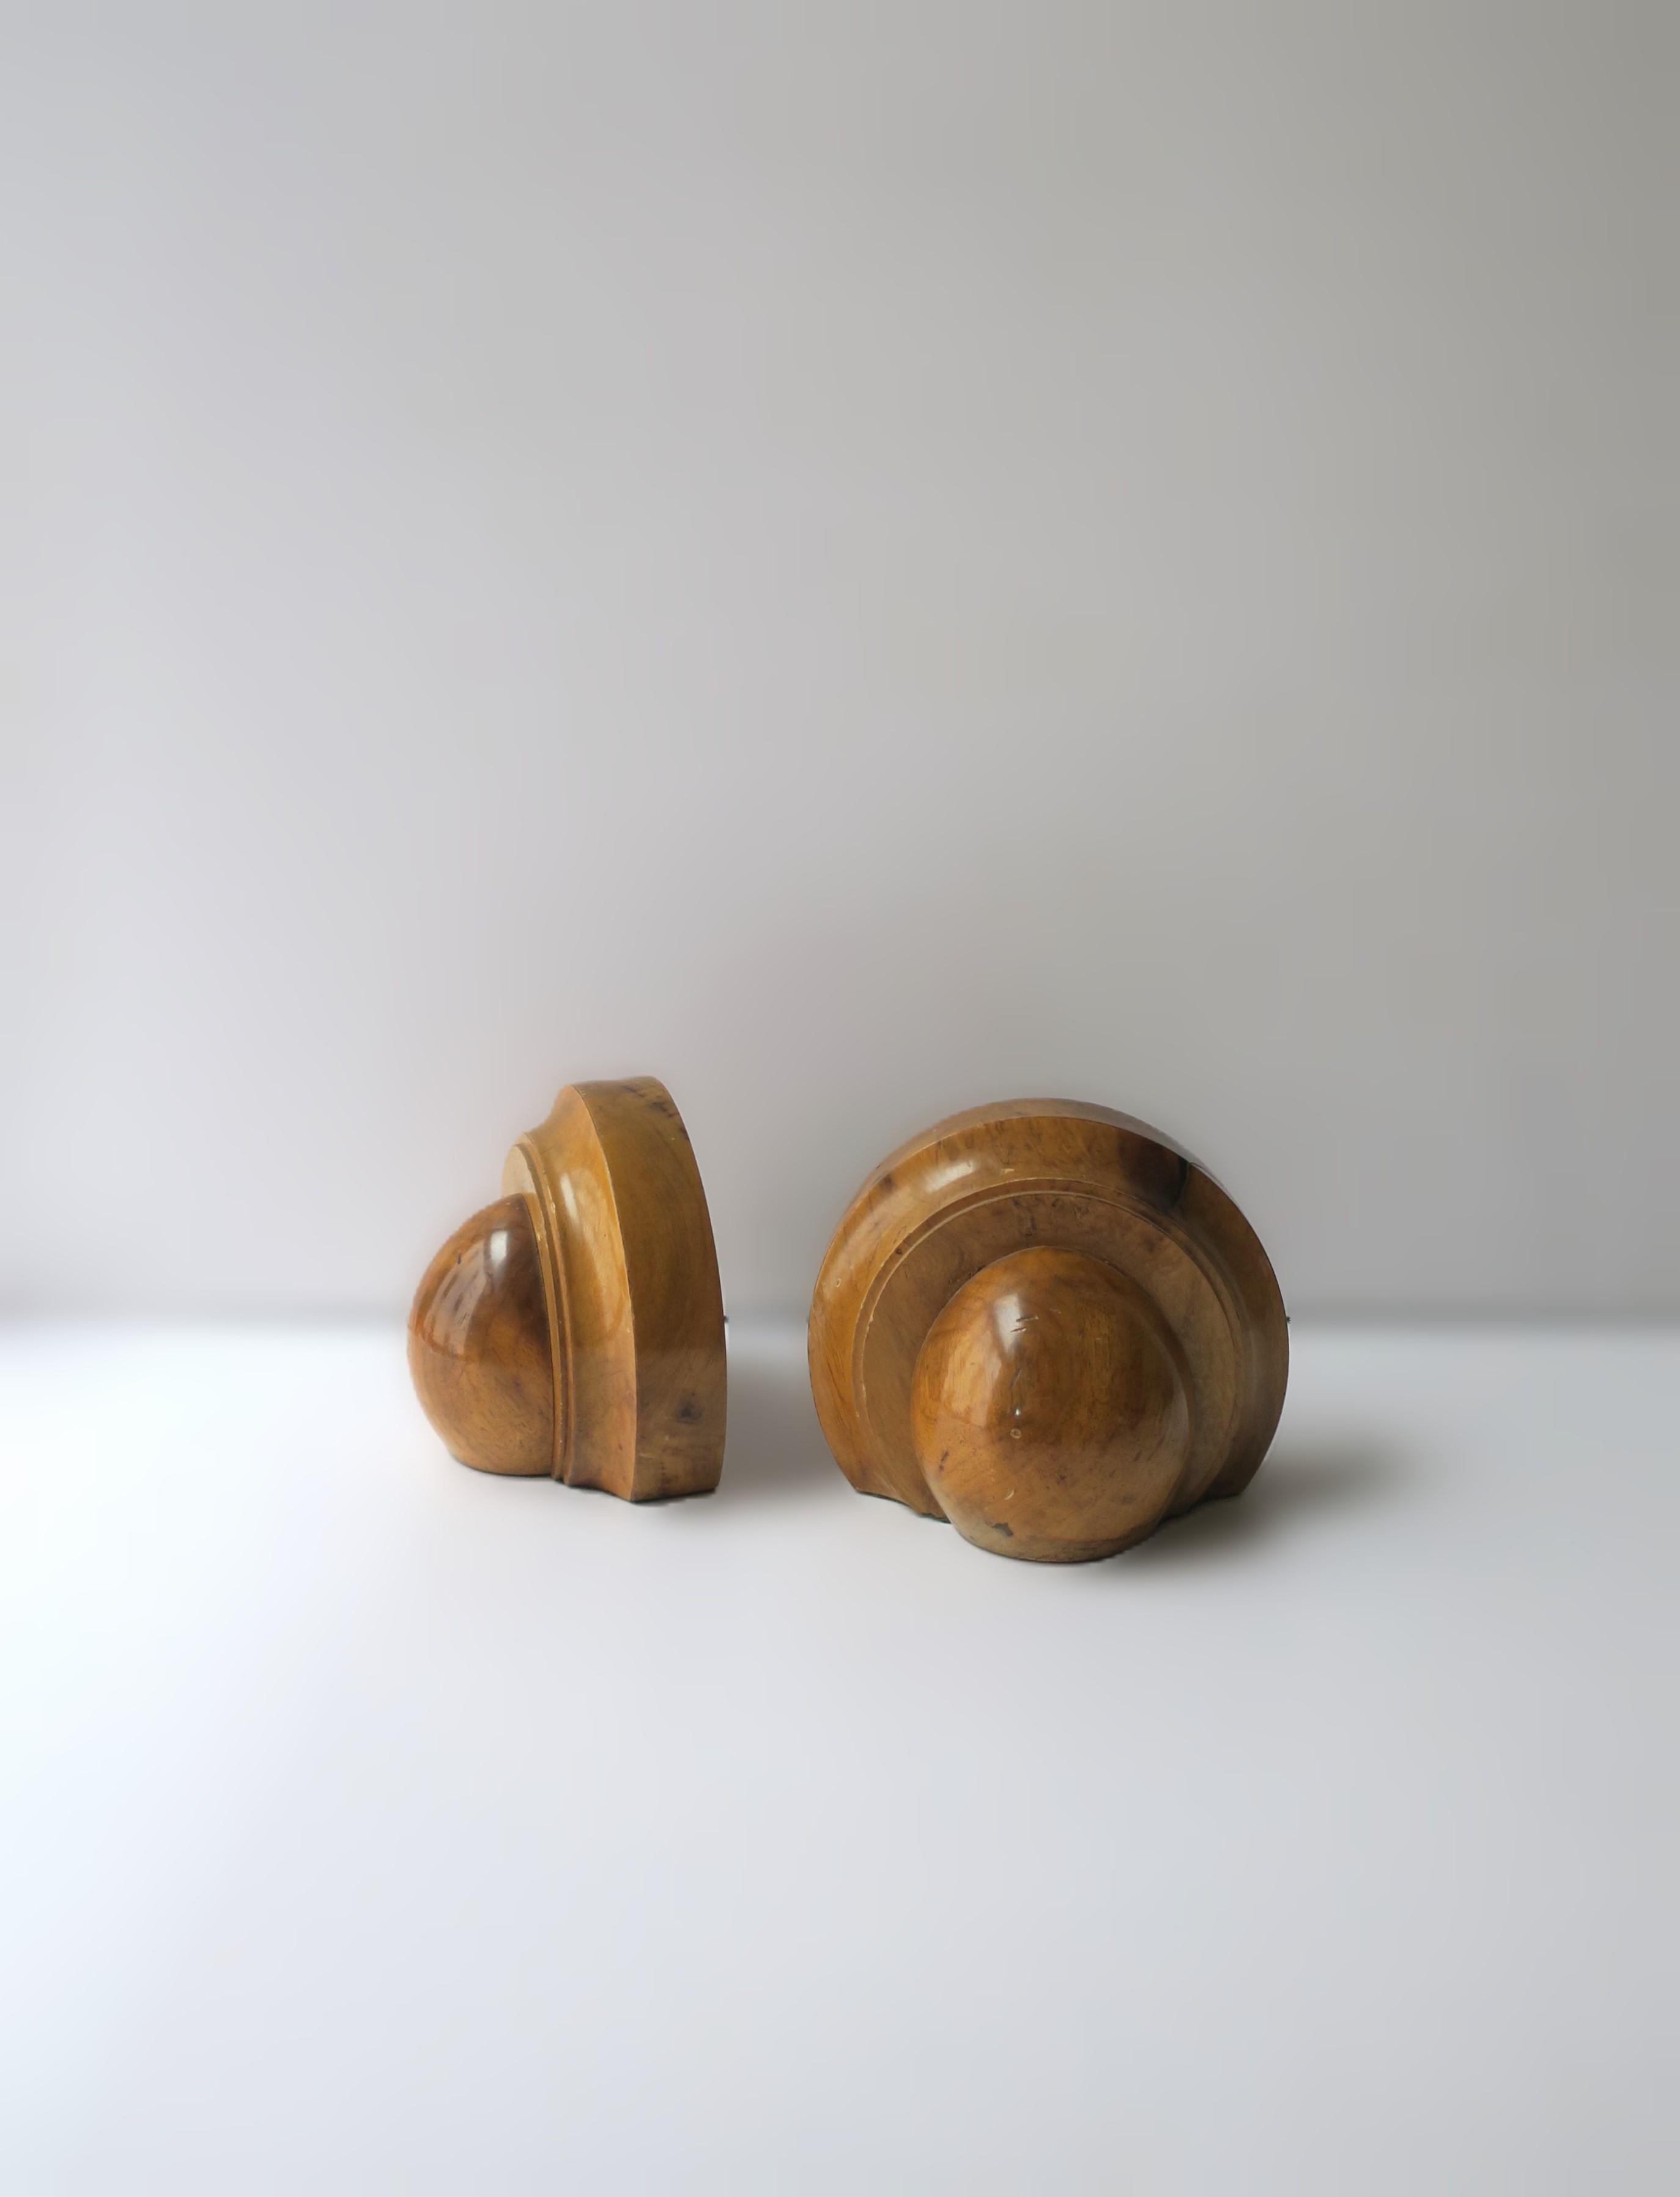 A pair of Birdseye maple wood bookends, Art Deco period, circa early-20th century. Dimensions: 3.75